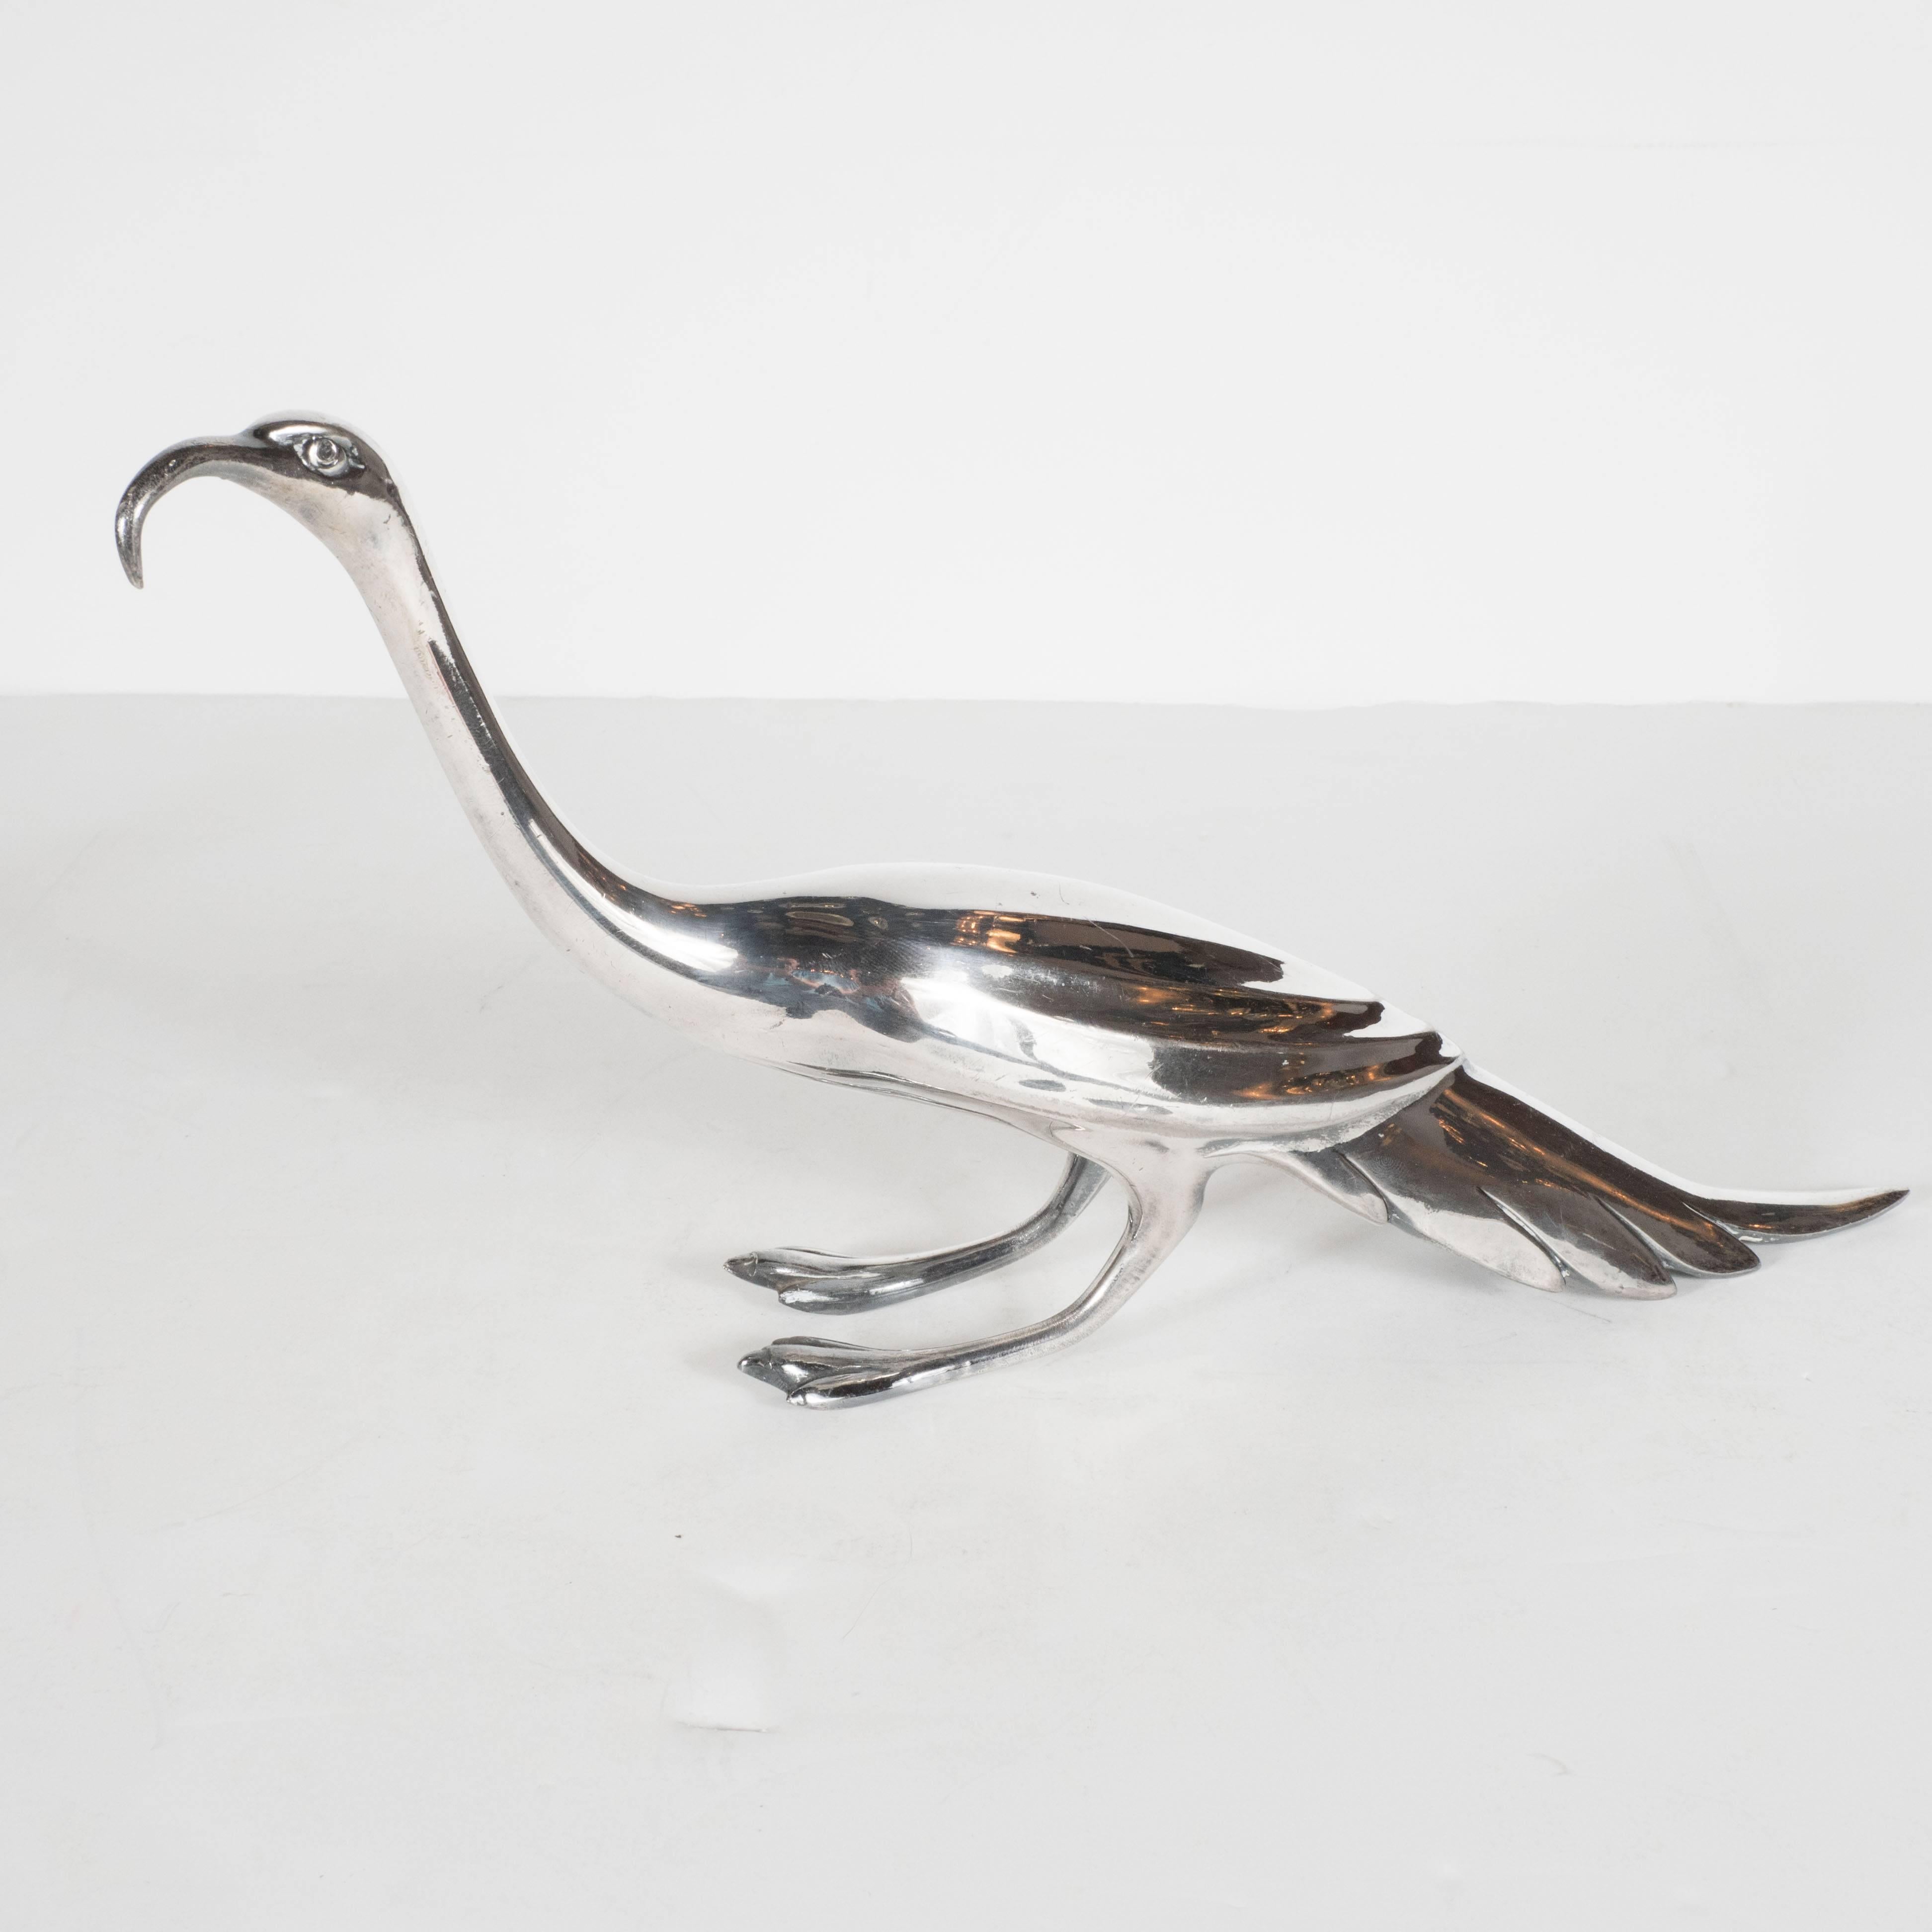 This pair of silver plated peacocks- one male, one female- was produced by the renowned American maker Weidlich Brothers Manufacturing Company, circa 1930. They are simultaneously whimsical, elegant, and sophisticated- representing perfect objet